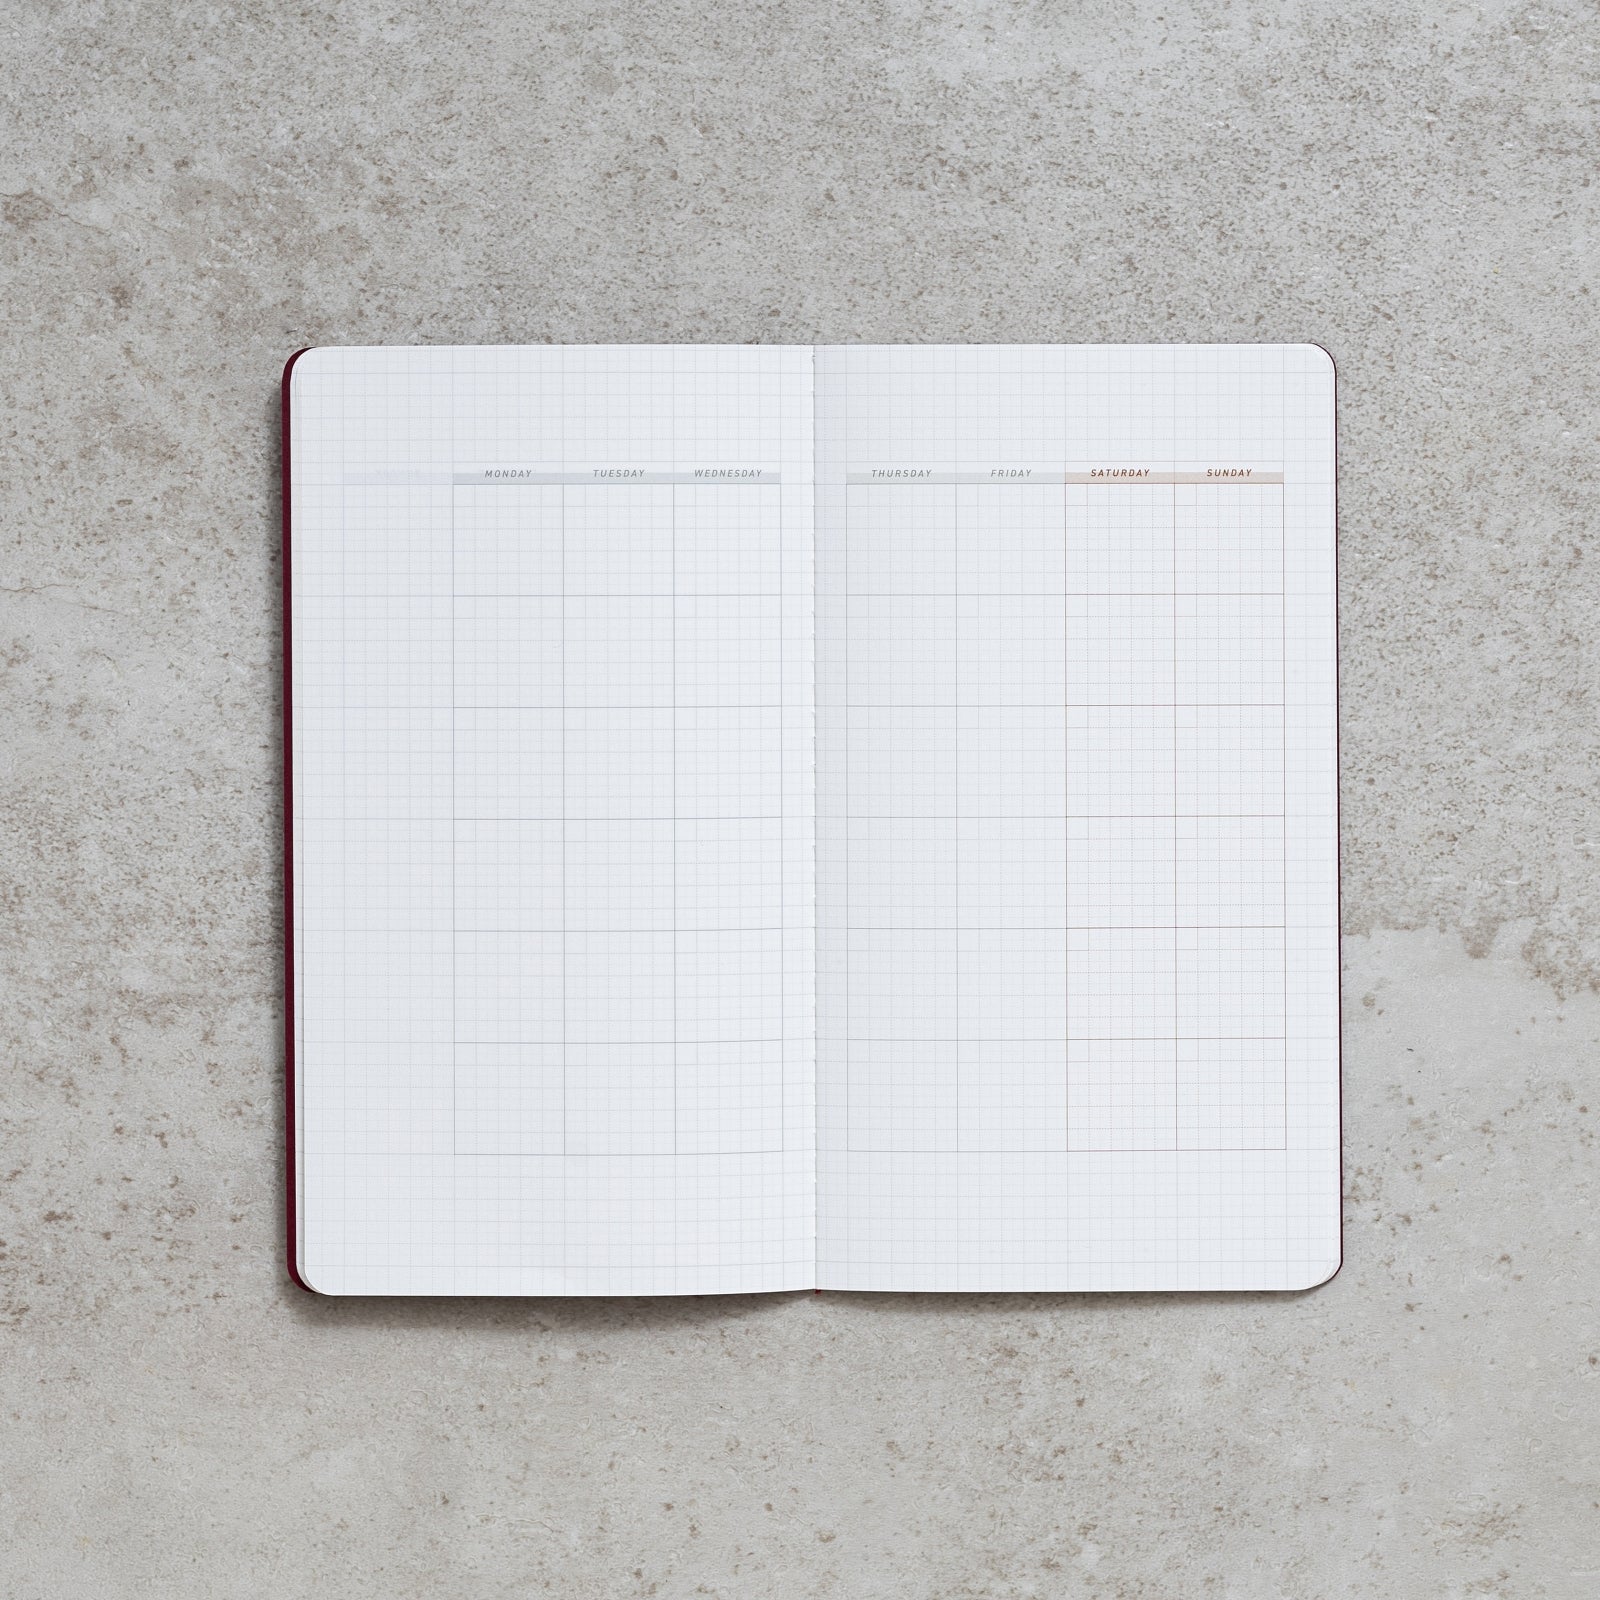 "RECORD" - LITE Undated Monthly Planner